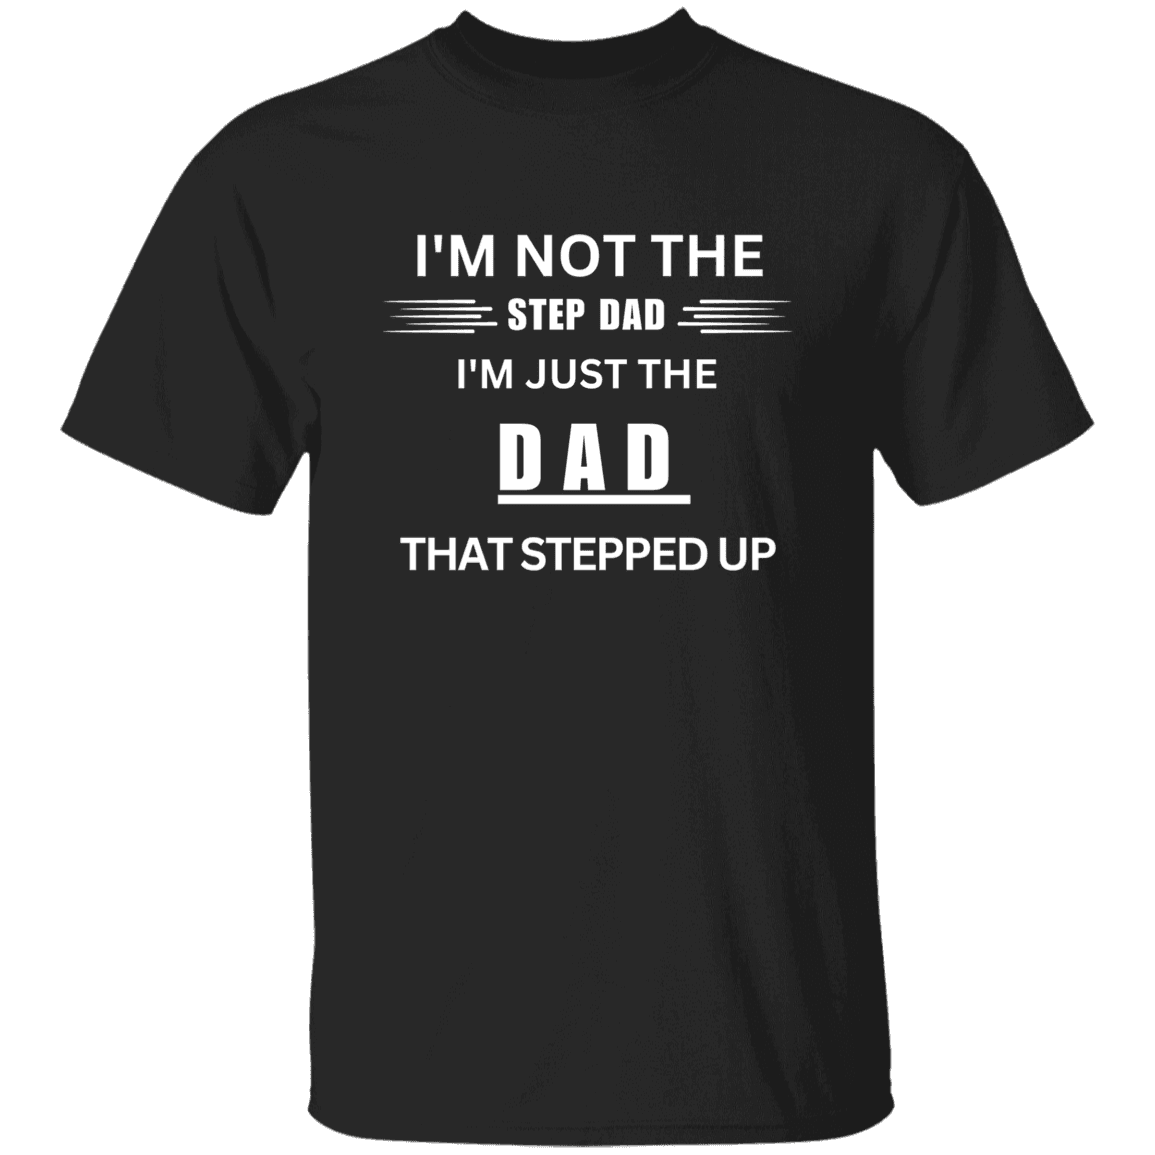 Front of the black Stepped Up Dad t-shirt. Material is heavyweight 100% cotton in a classic unisex t-shirt style. Printed in white letters on the chest is the phrase: "I'm not the Step Dad, I'm just the DAD that stepped up"